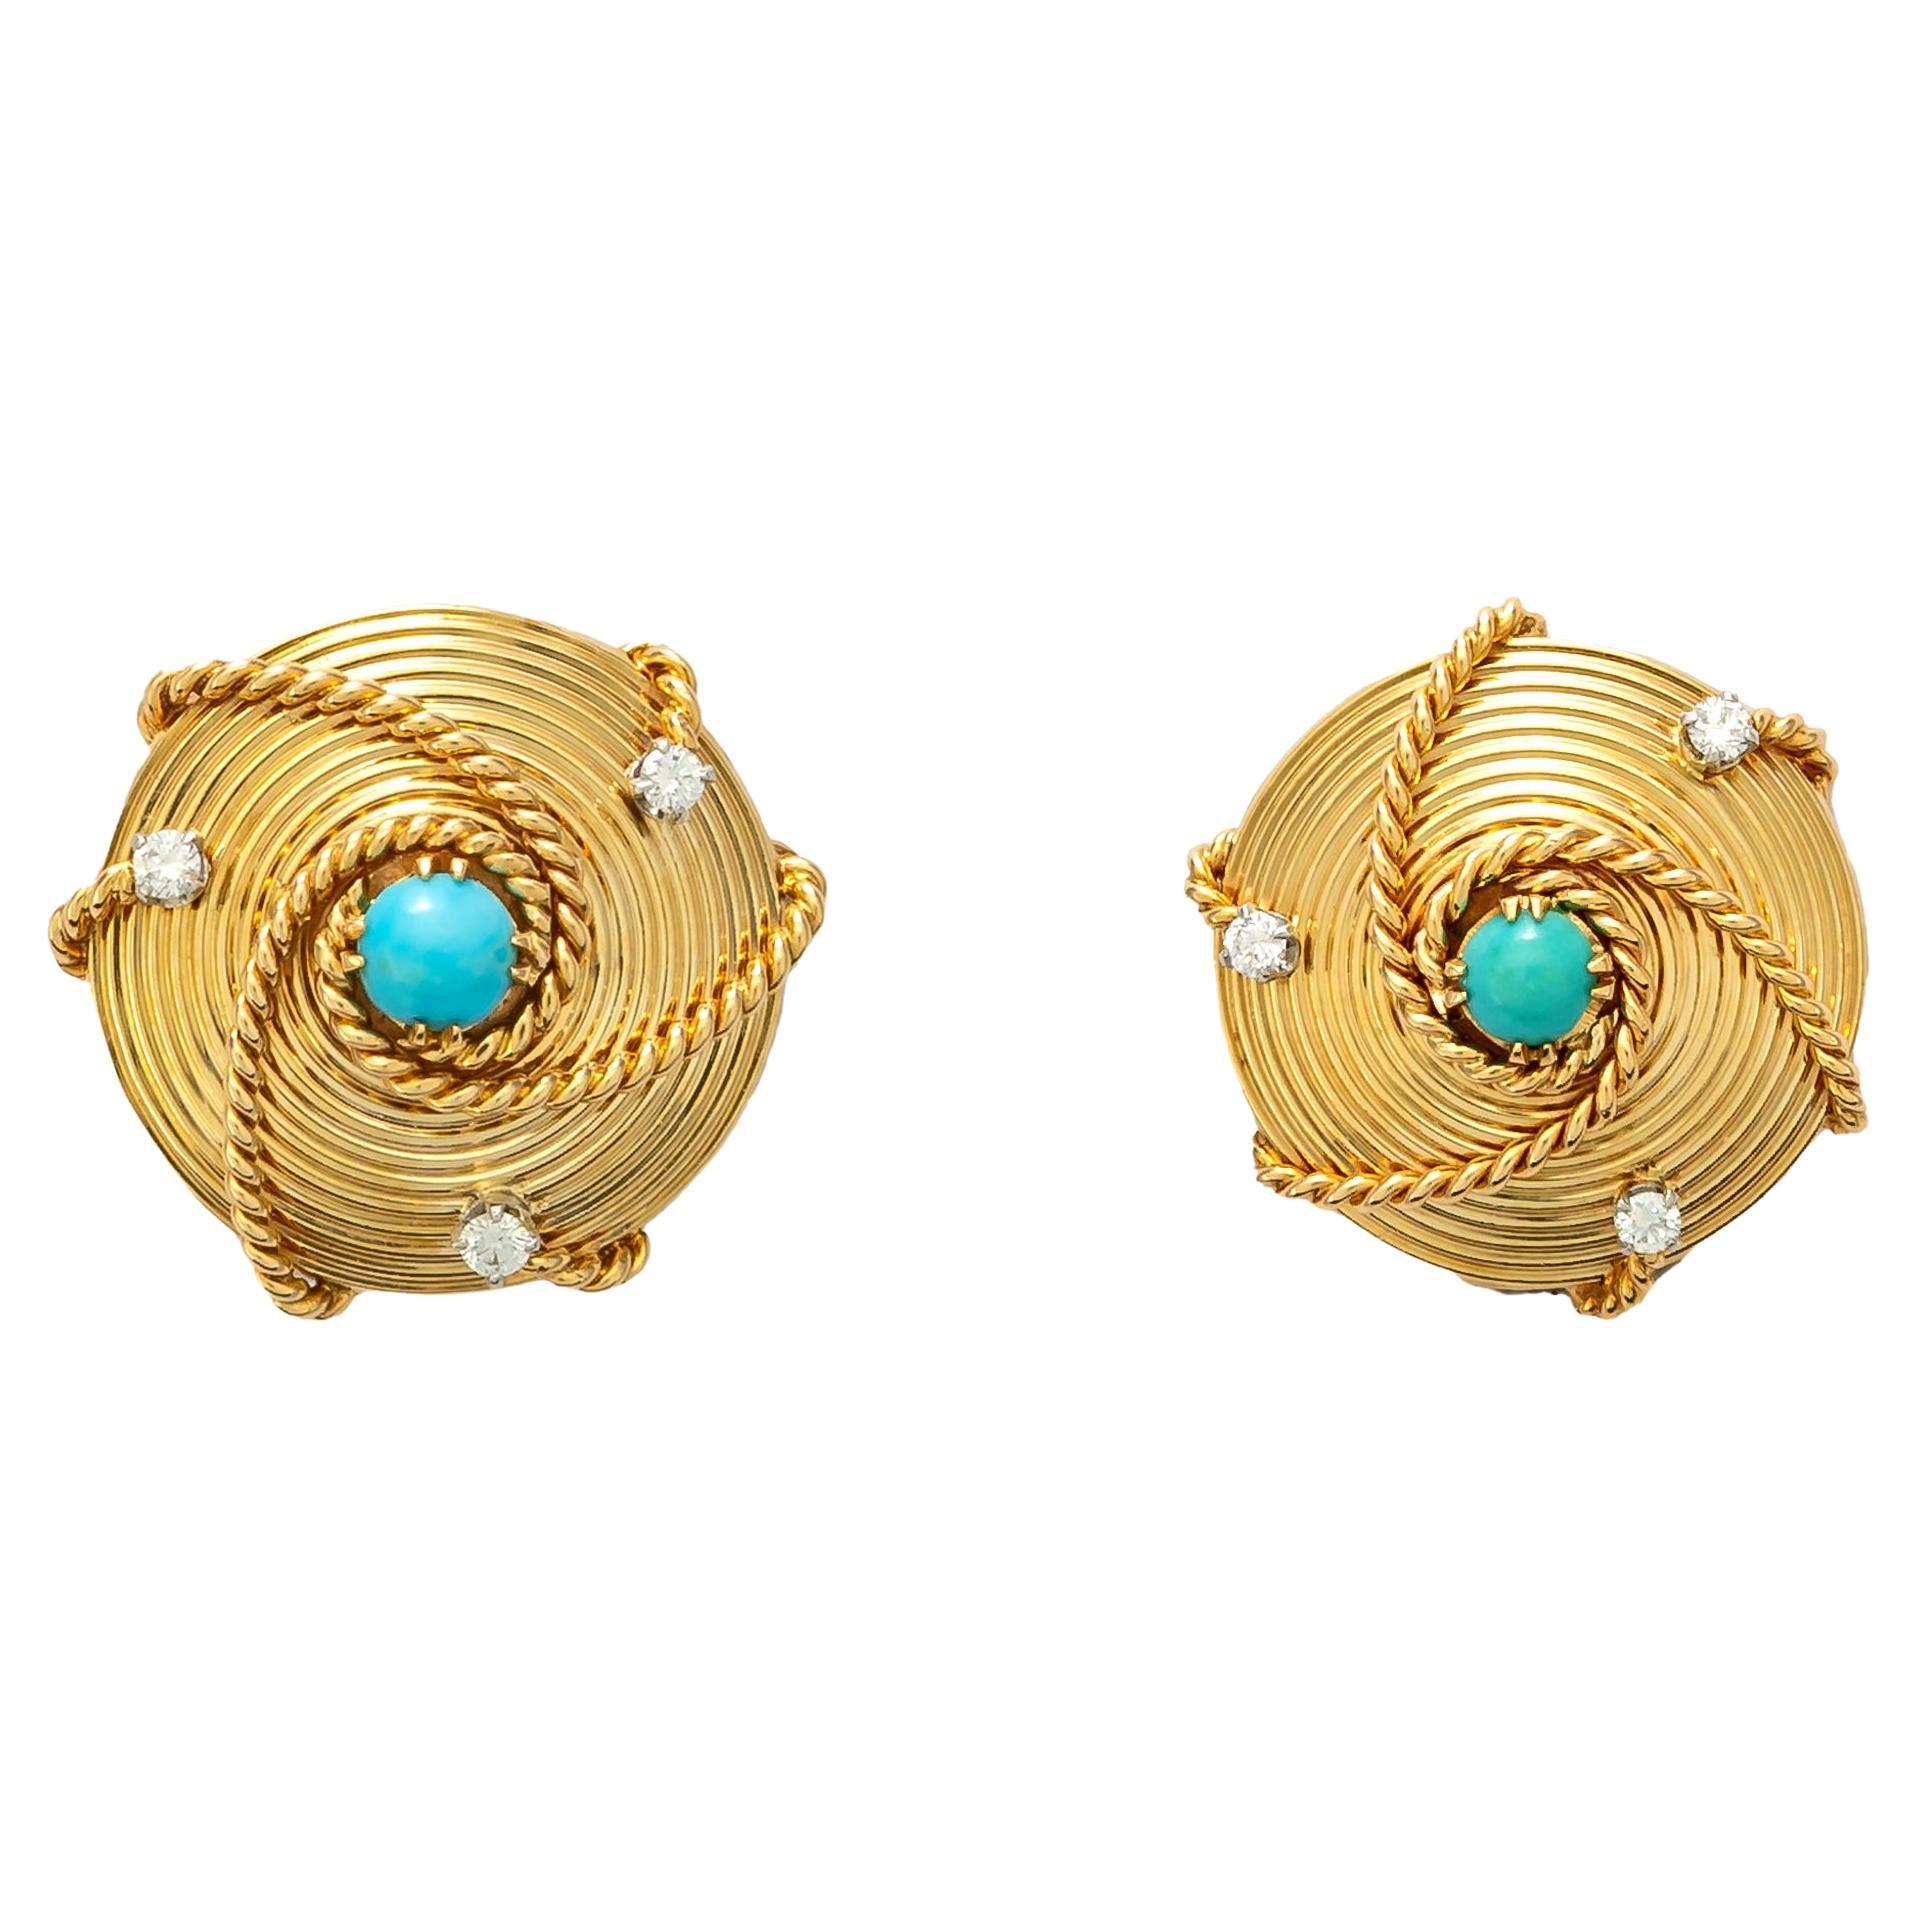 Cartier Gold Turquoise and Diamond Earrings